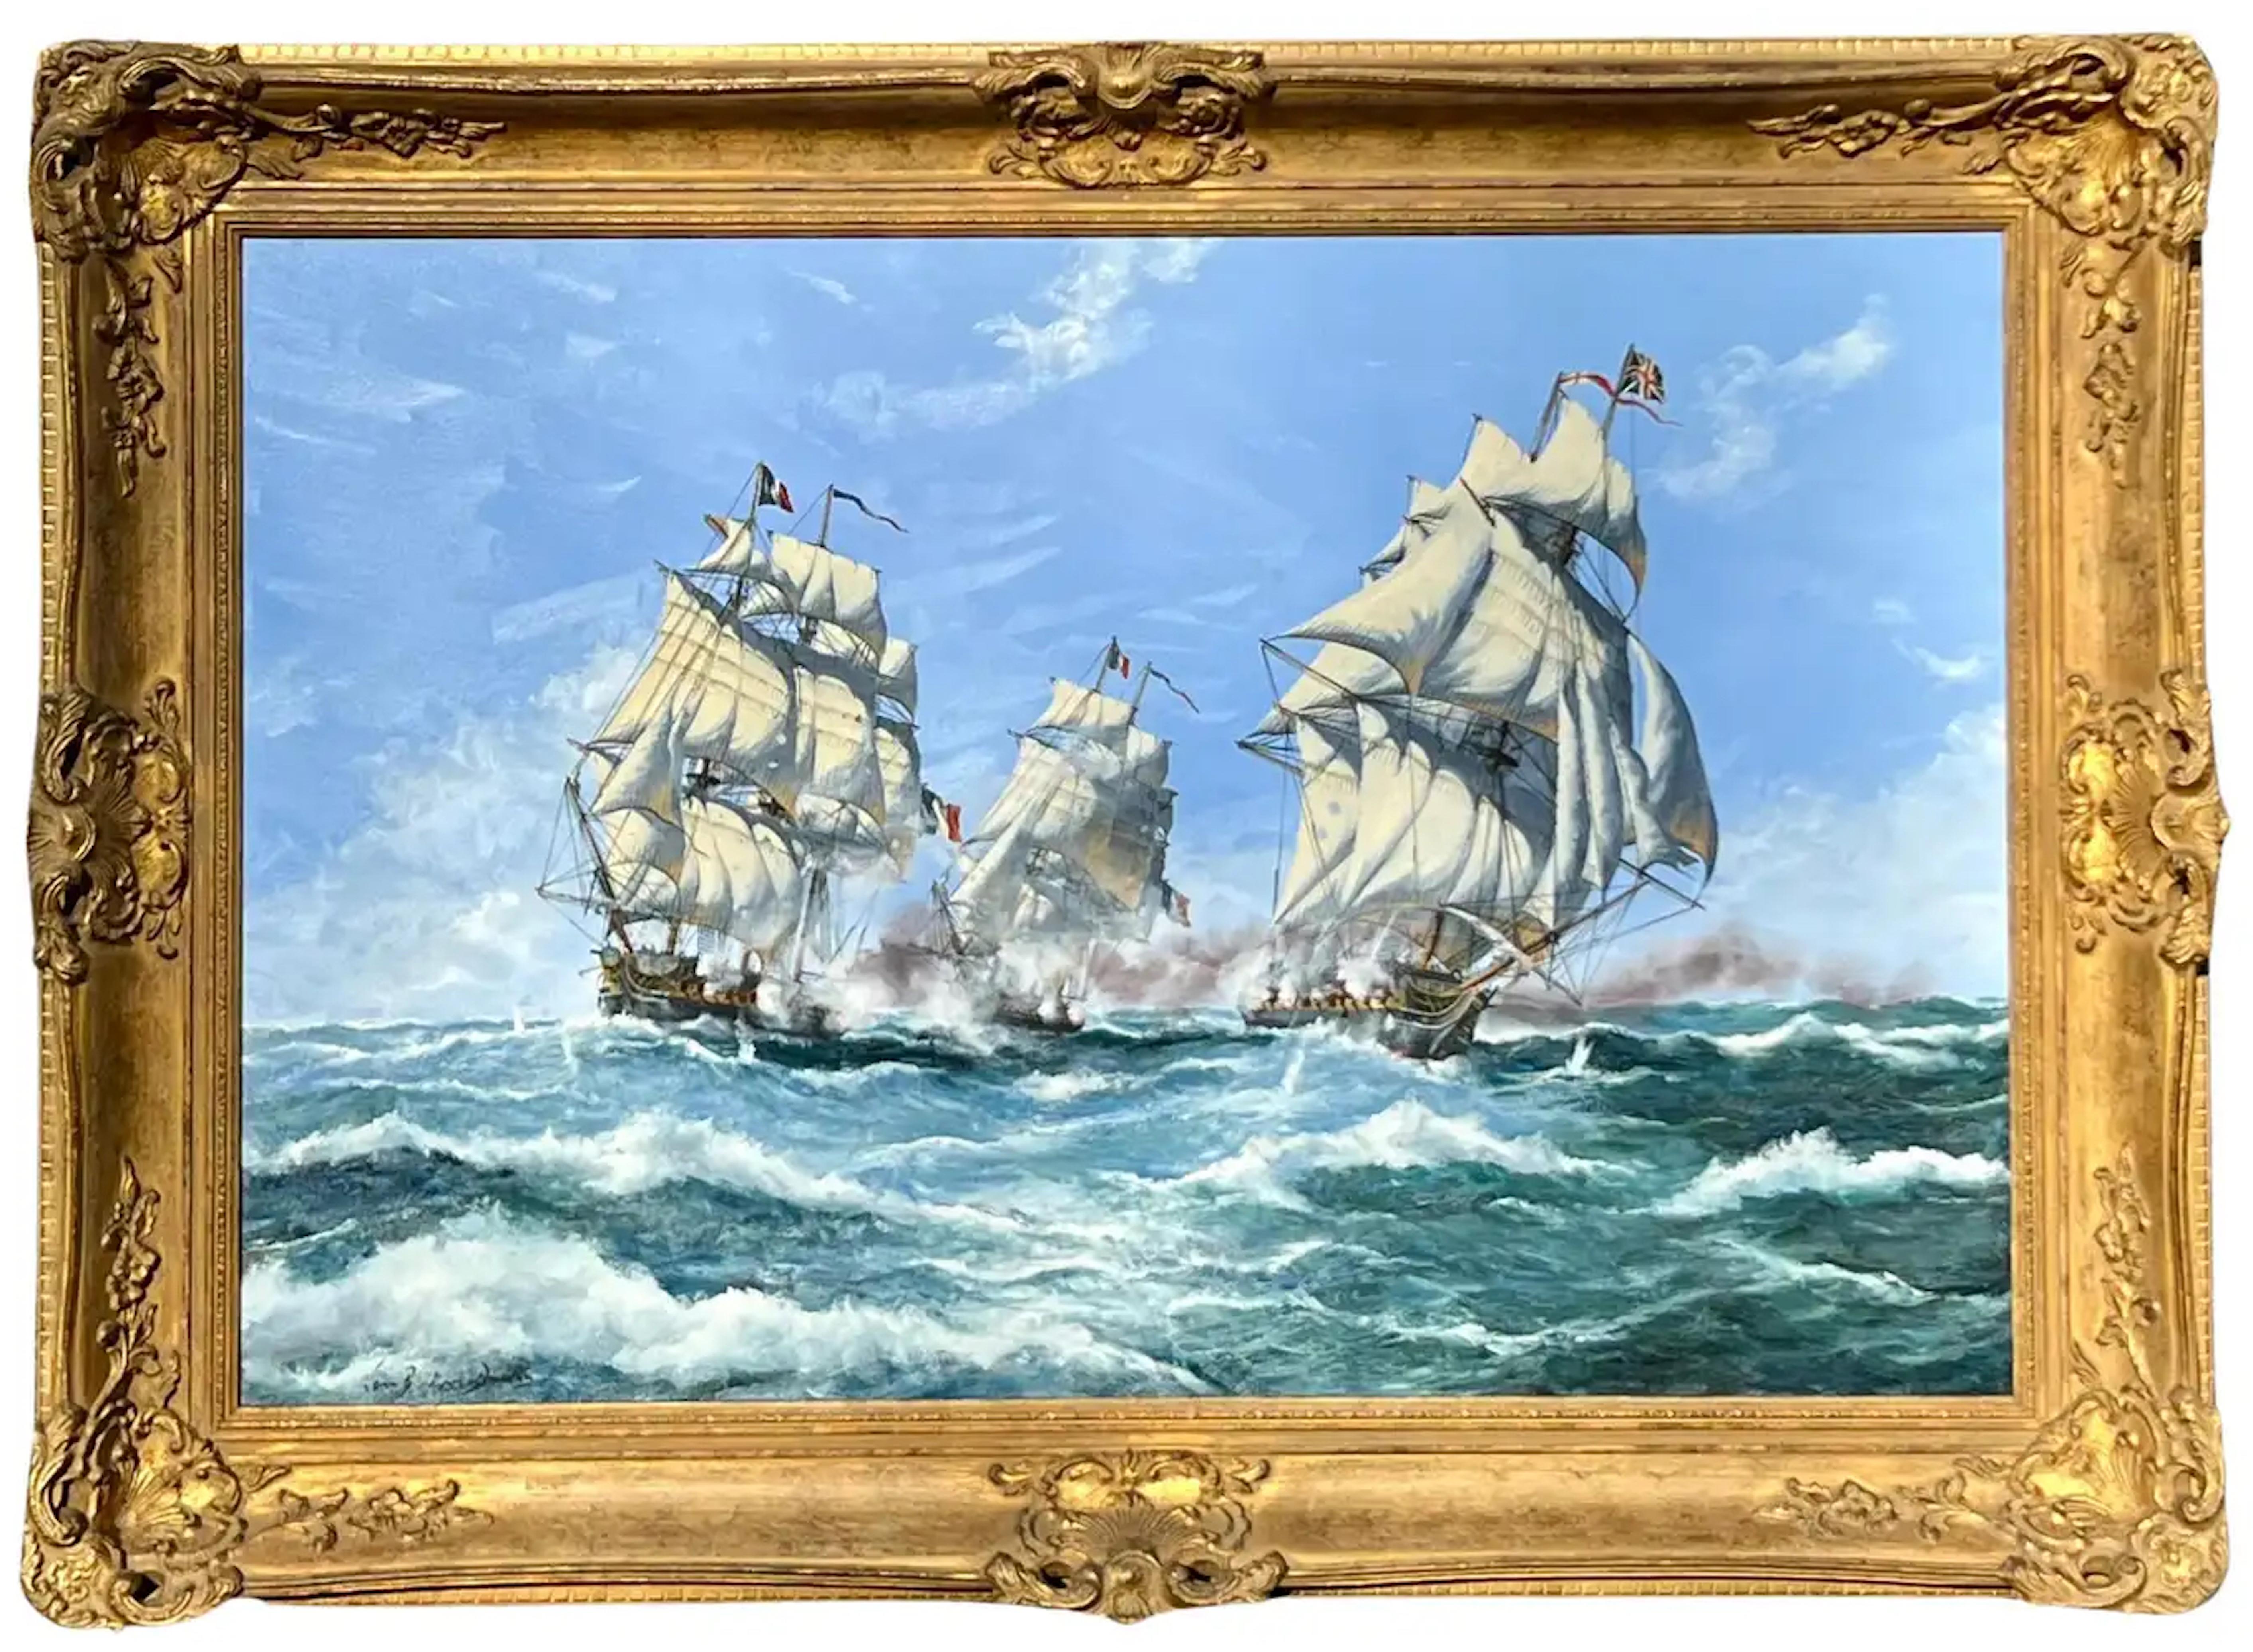 John Bentham-Dinsdale Landscape Painting - The Chase of the Frigate HMS Brilliant